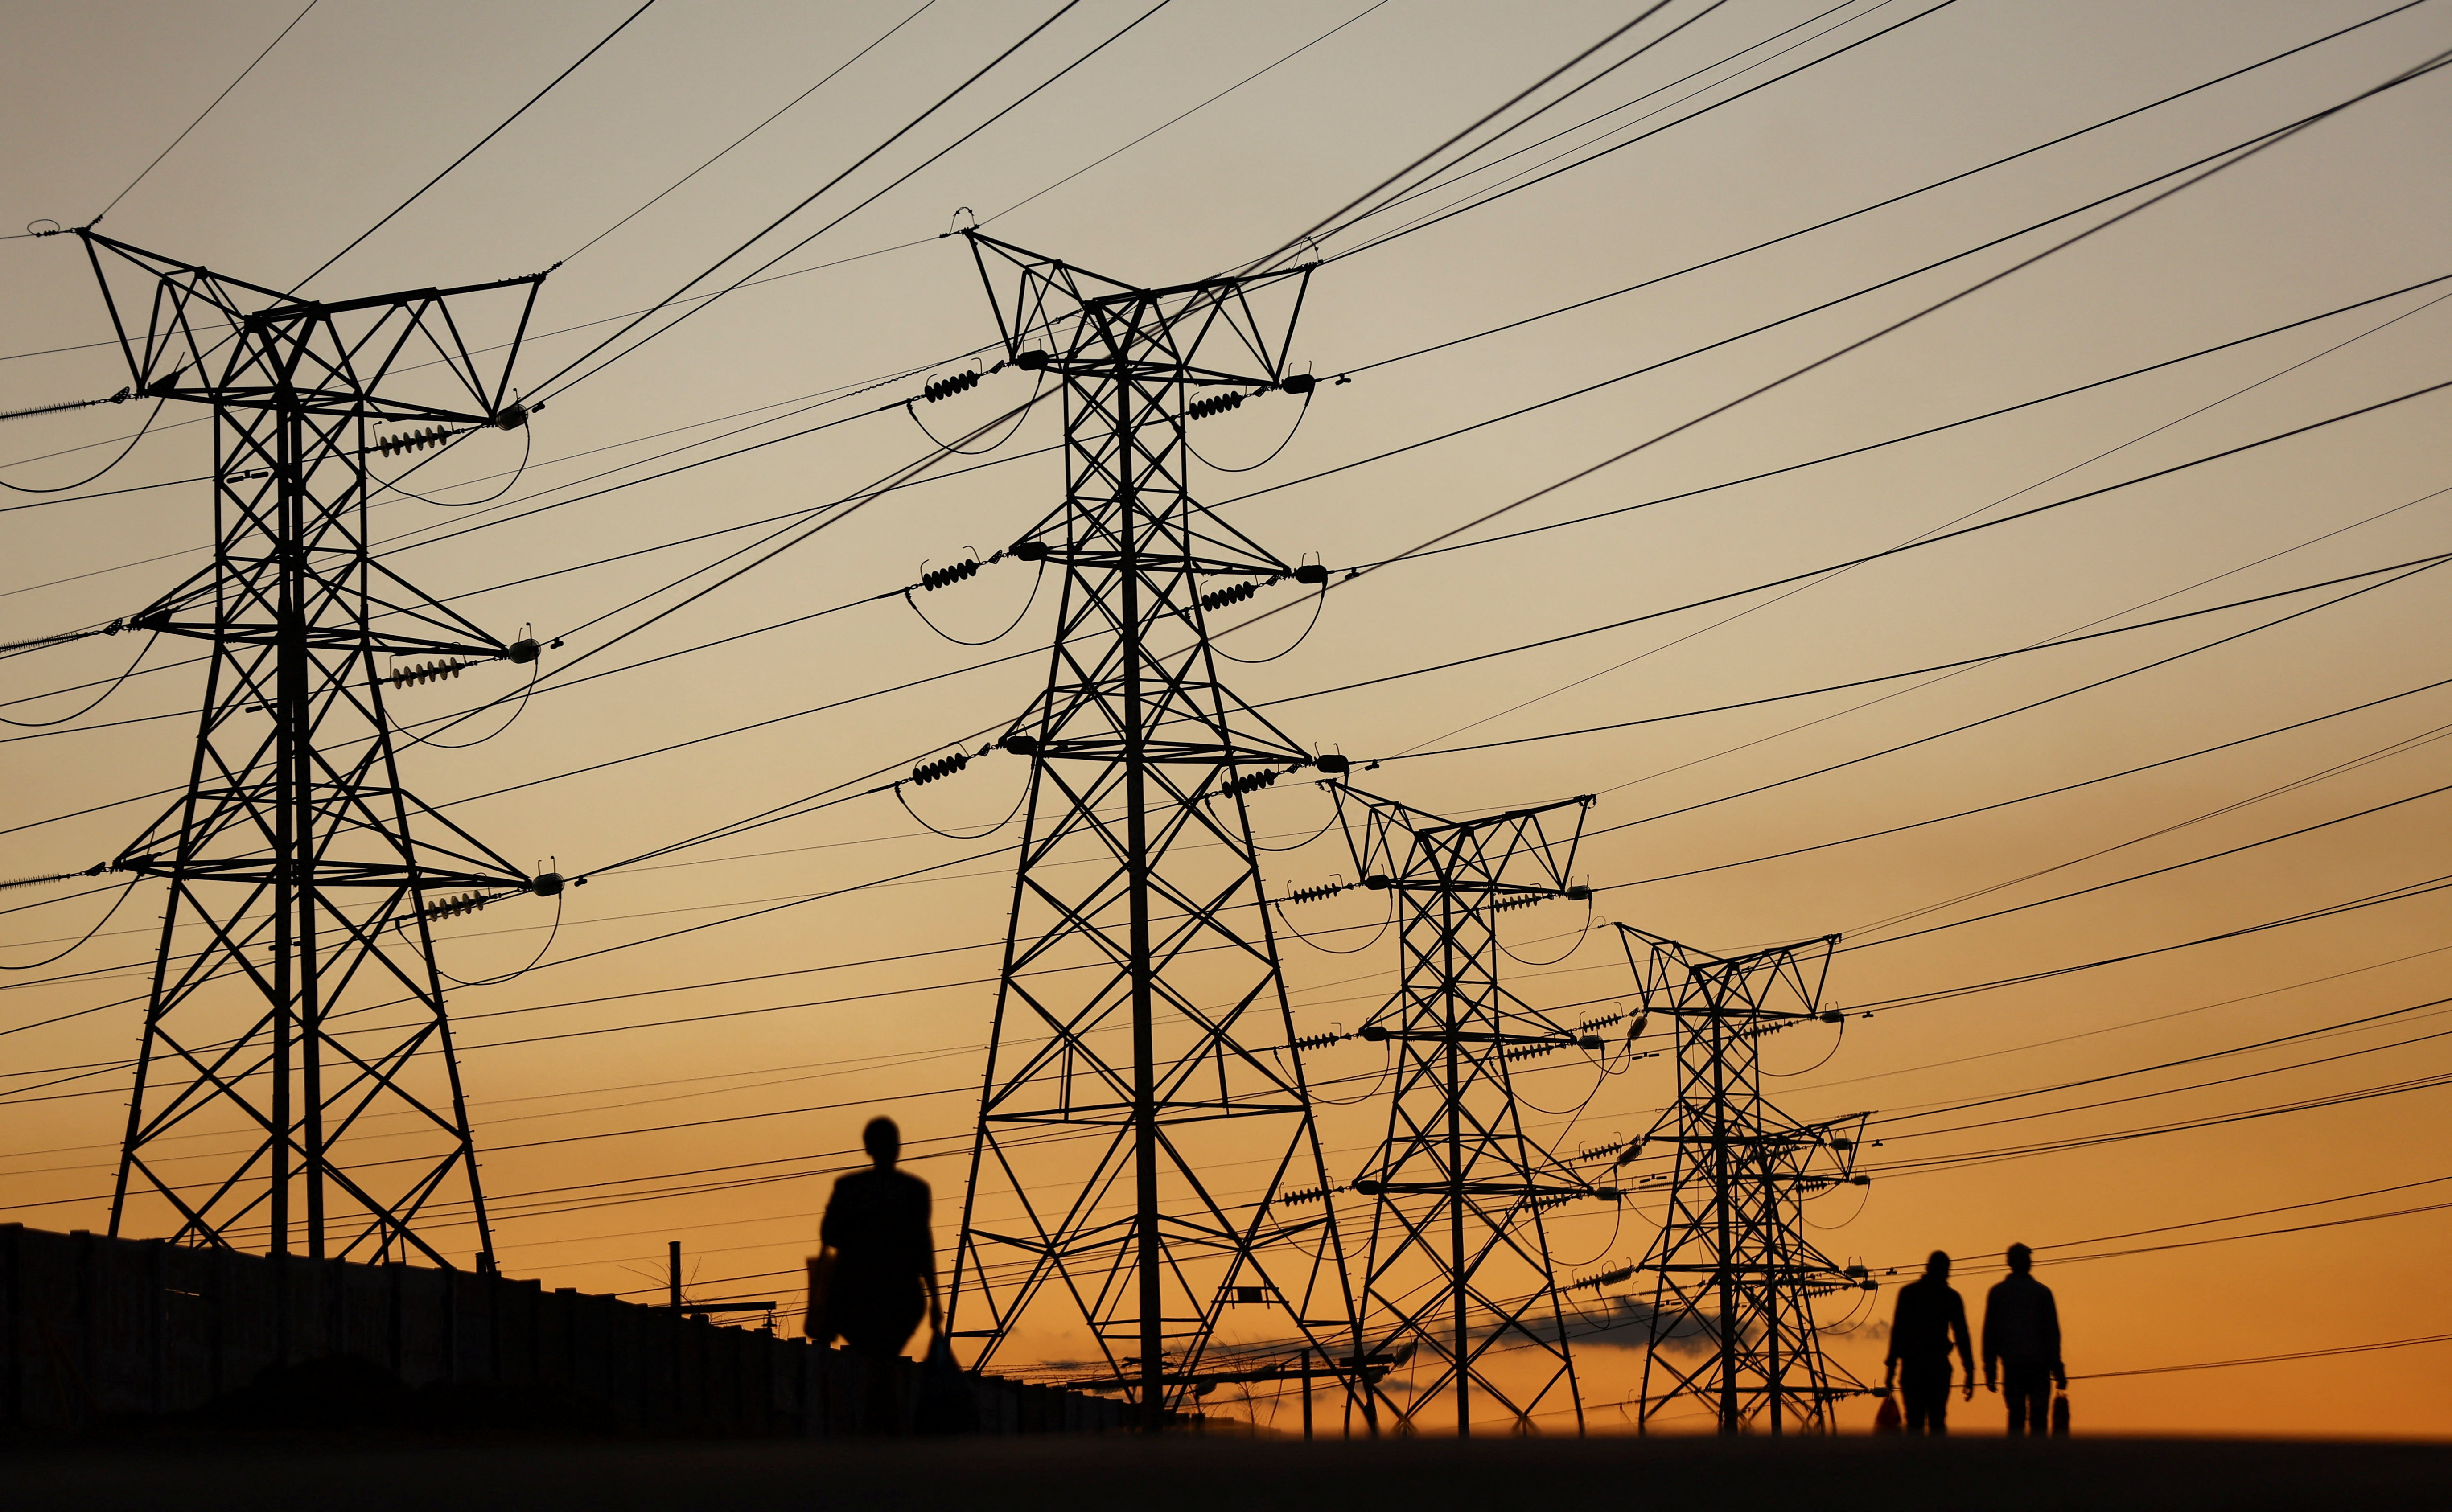 South Africa's Eskom extends daily power cuts for next week amid capacity shortage